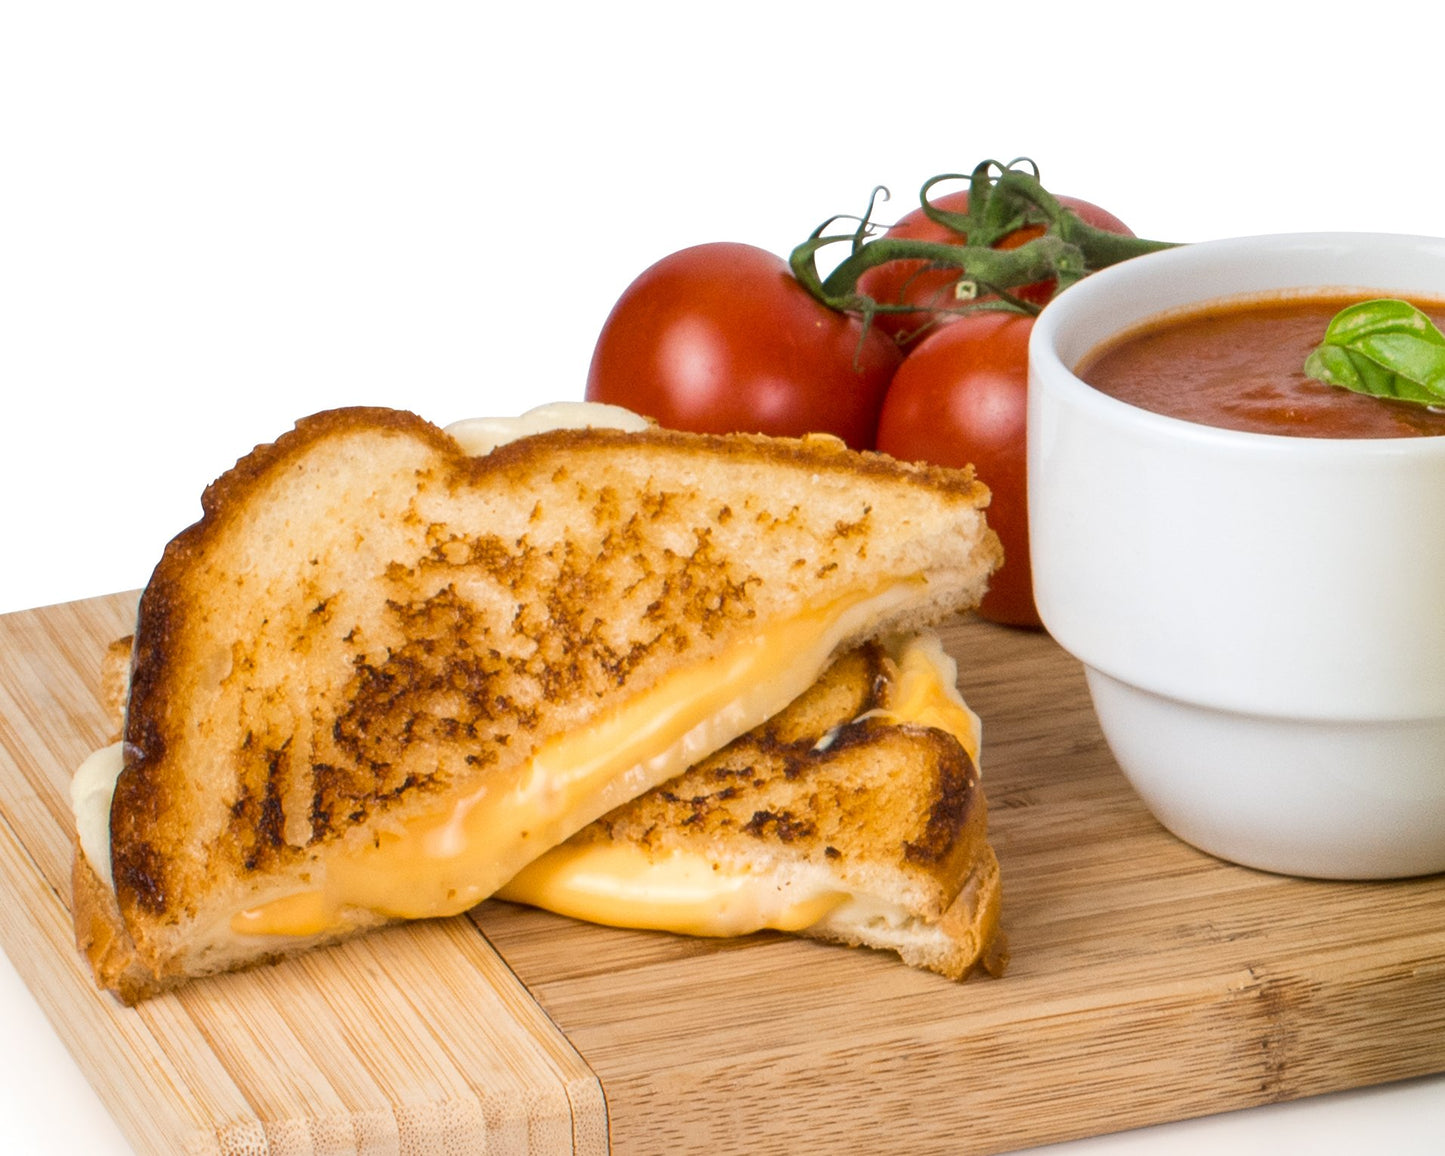 A grilled cheese toasted sandwich oozing cheese resting on a breadboard with tomatoes and tomato sauce